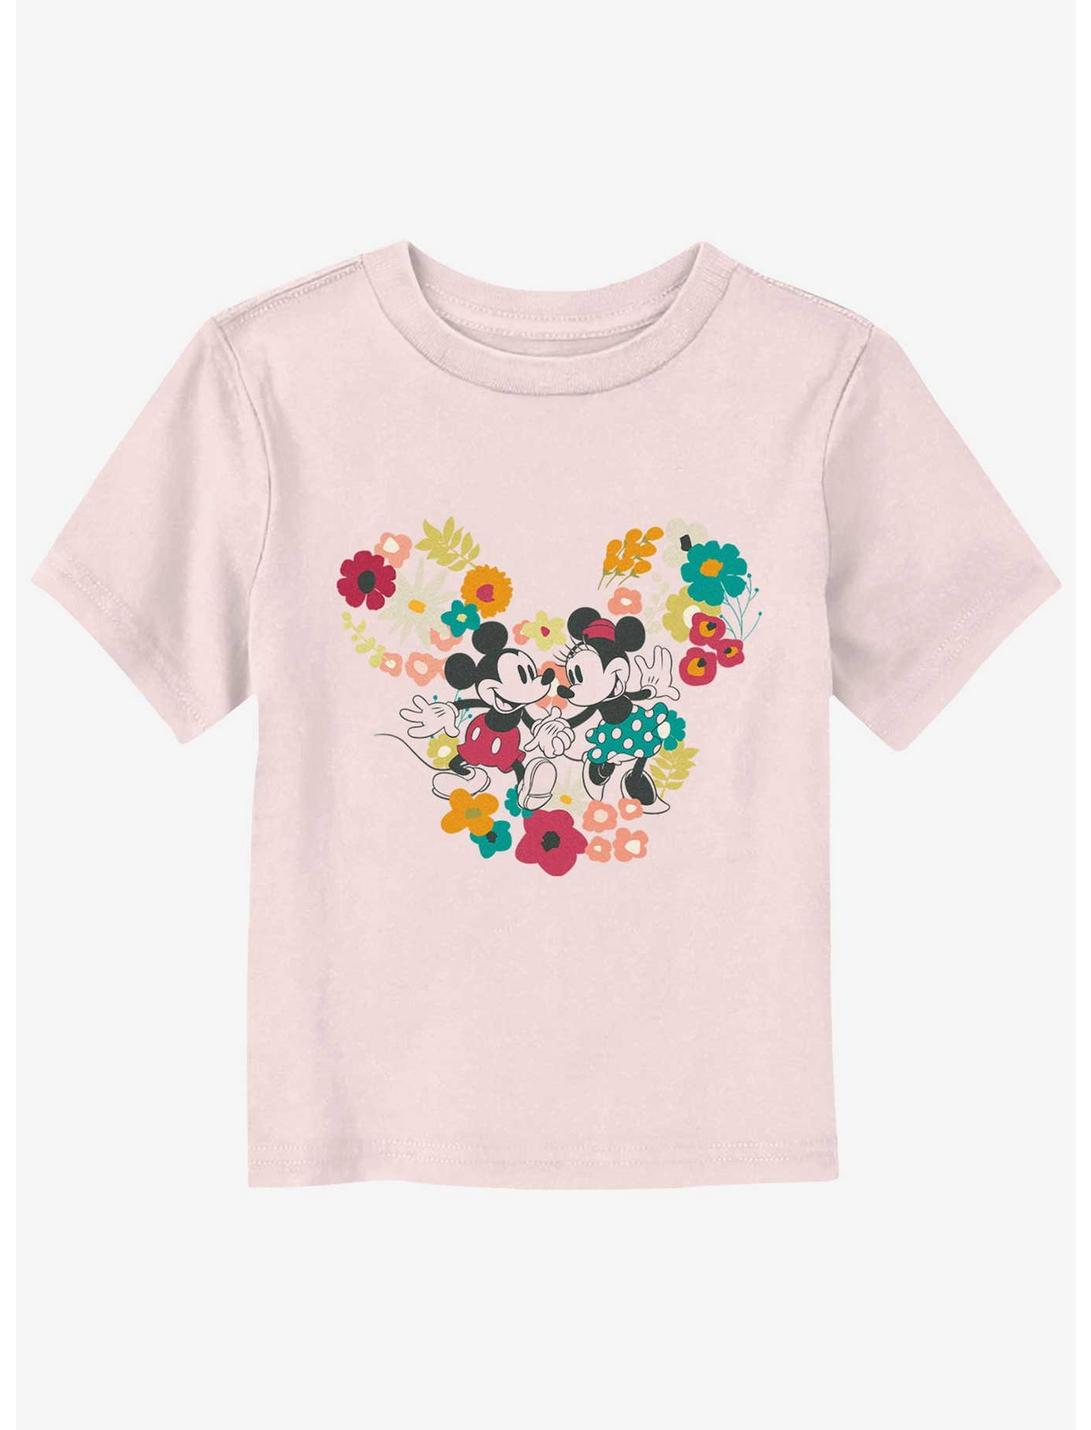 Disney Mickey and Minnie Mouse Floral Outline Toddler T-Shirt, LIGHT PINK, hi-res